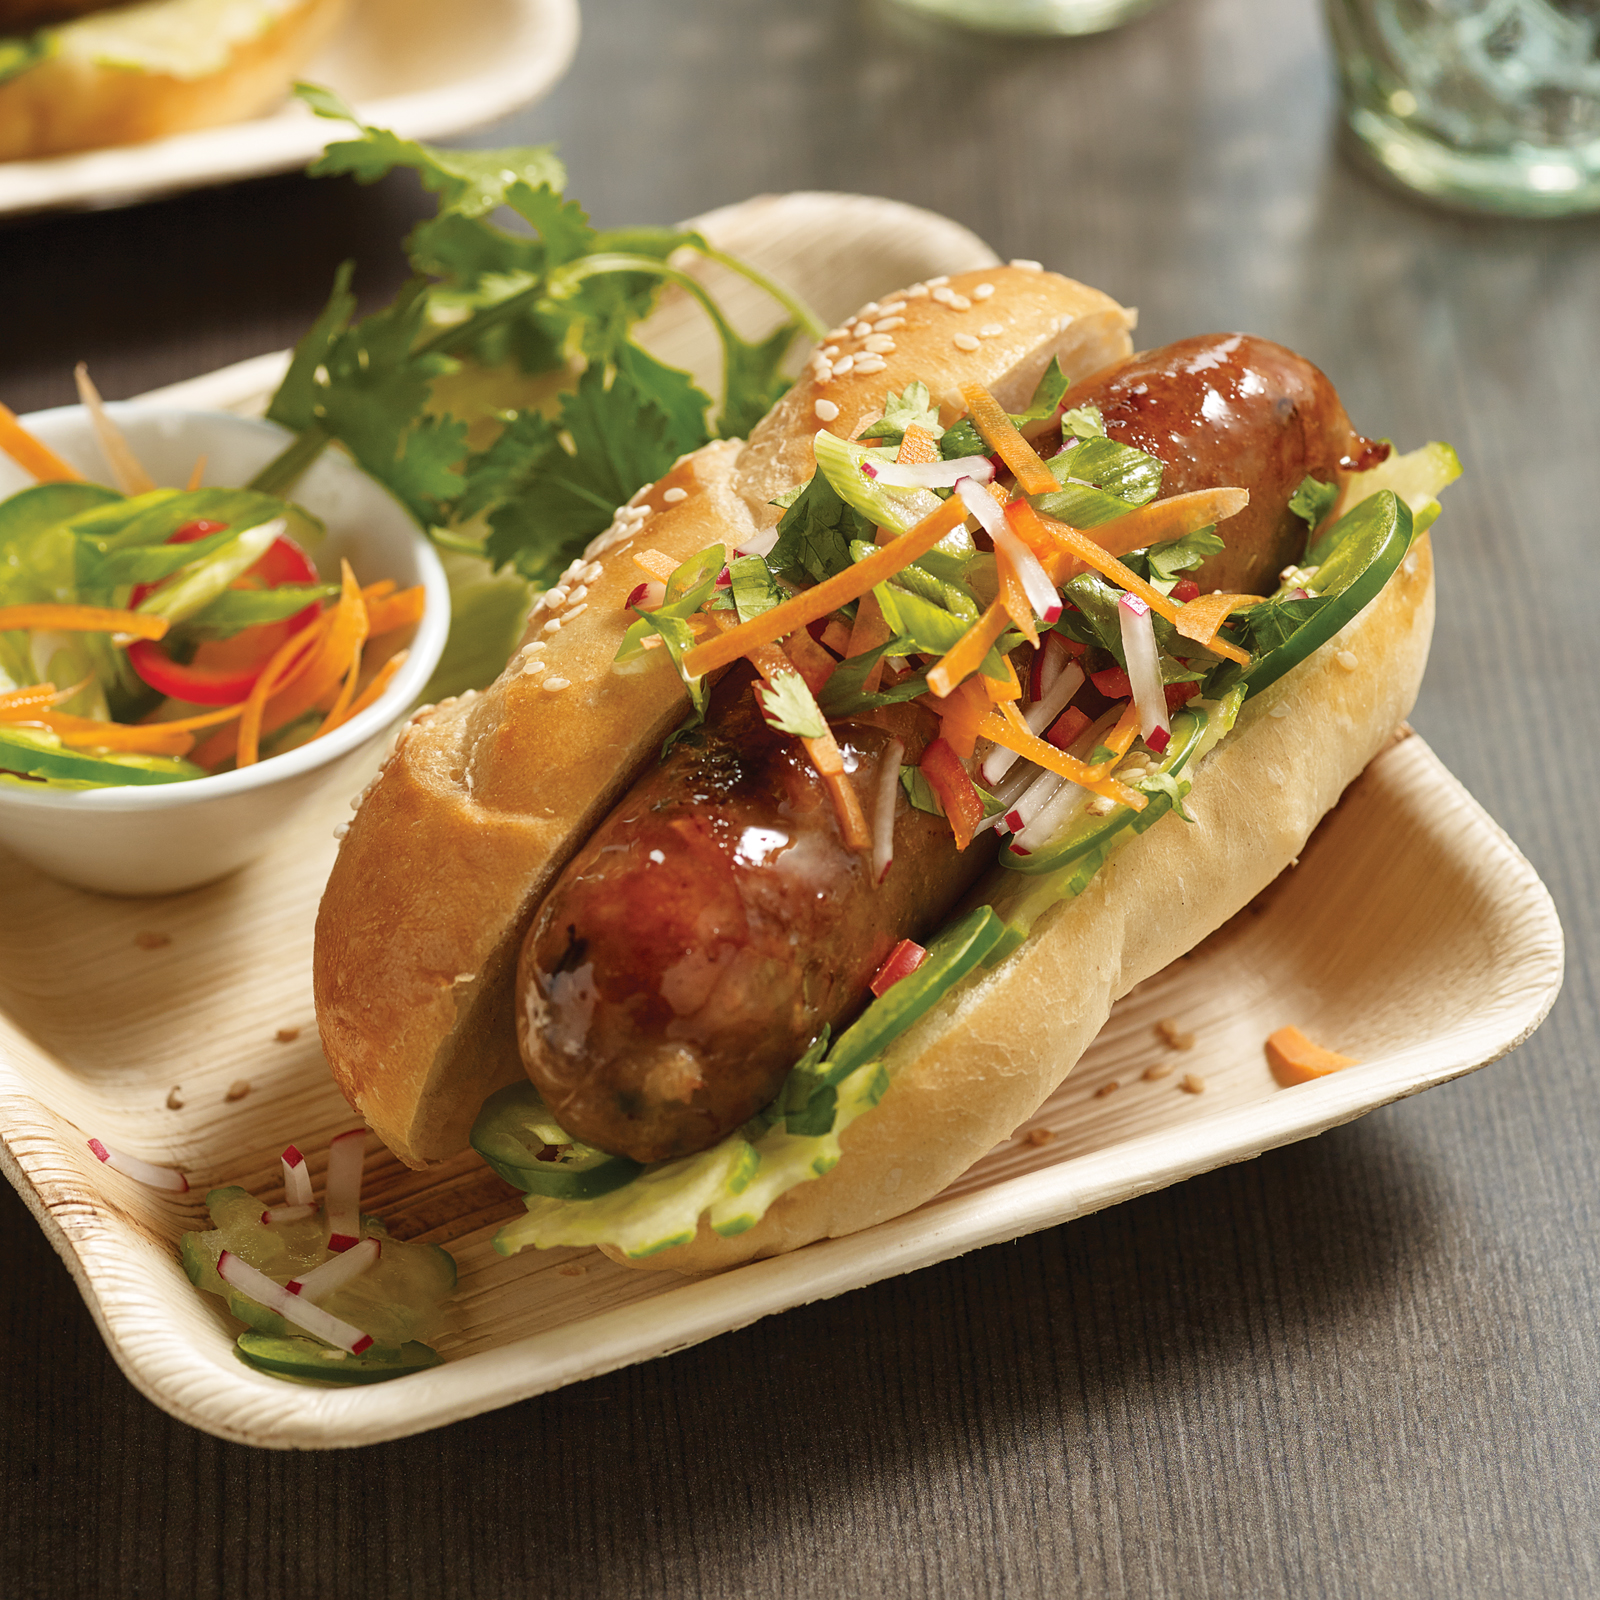 Omaha Steaks new Pork Potsticker Sausage brings all the flavor of the Asian favorite to your summer barbeque.